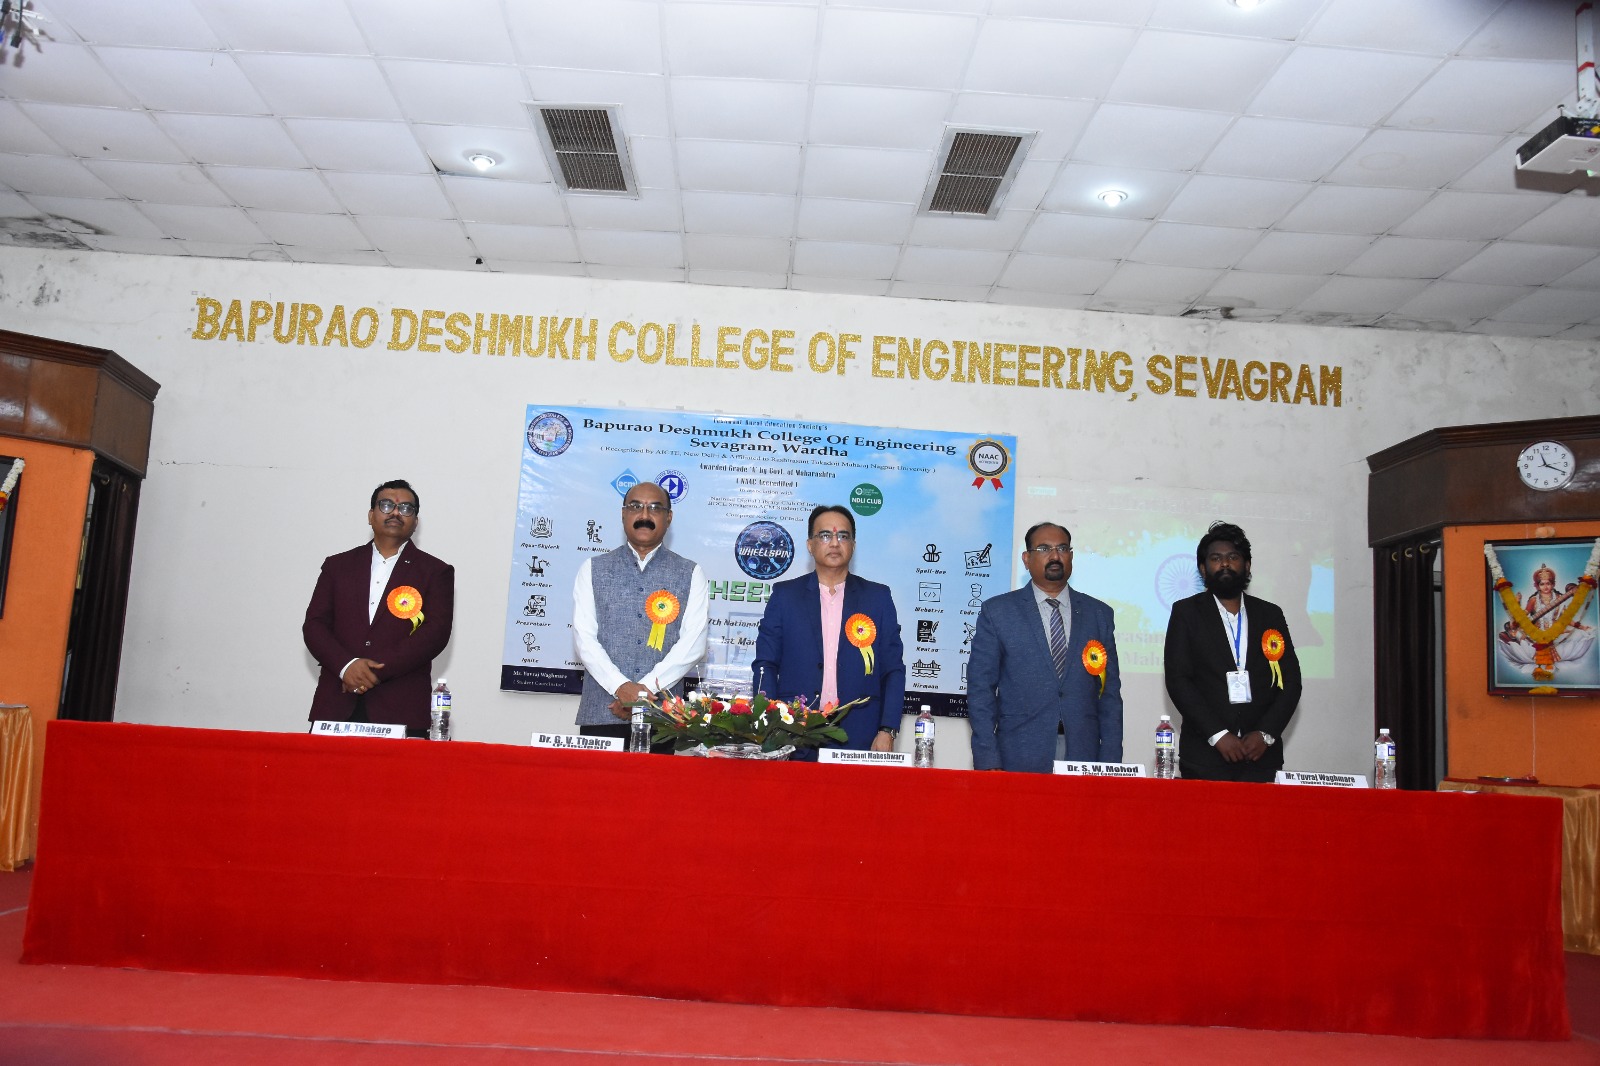 Bapurao Deshmukh College of Engineering, Sevagram organized the 17th National level Techfest Wheelspin 2023 on 1st March 2023 in association with NDL, CSI, ACM students chapter.